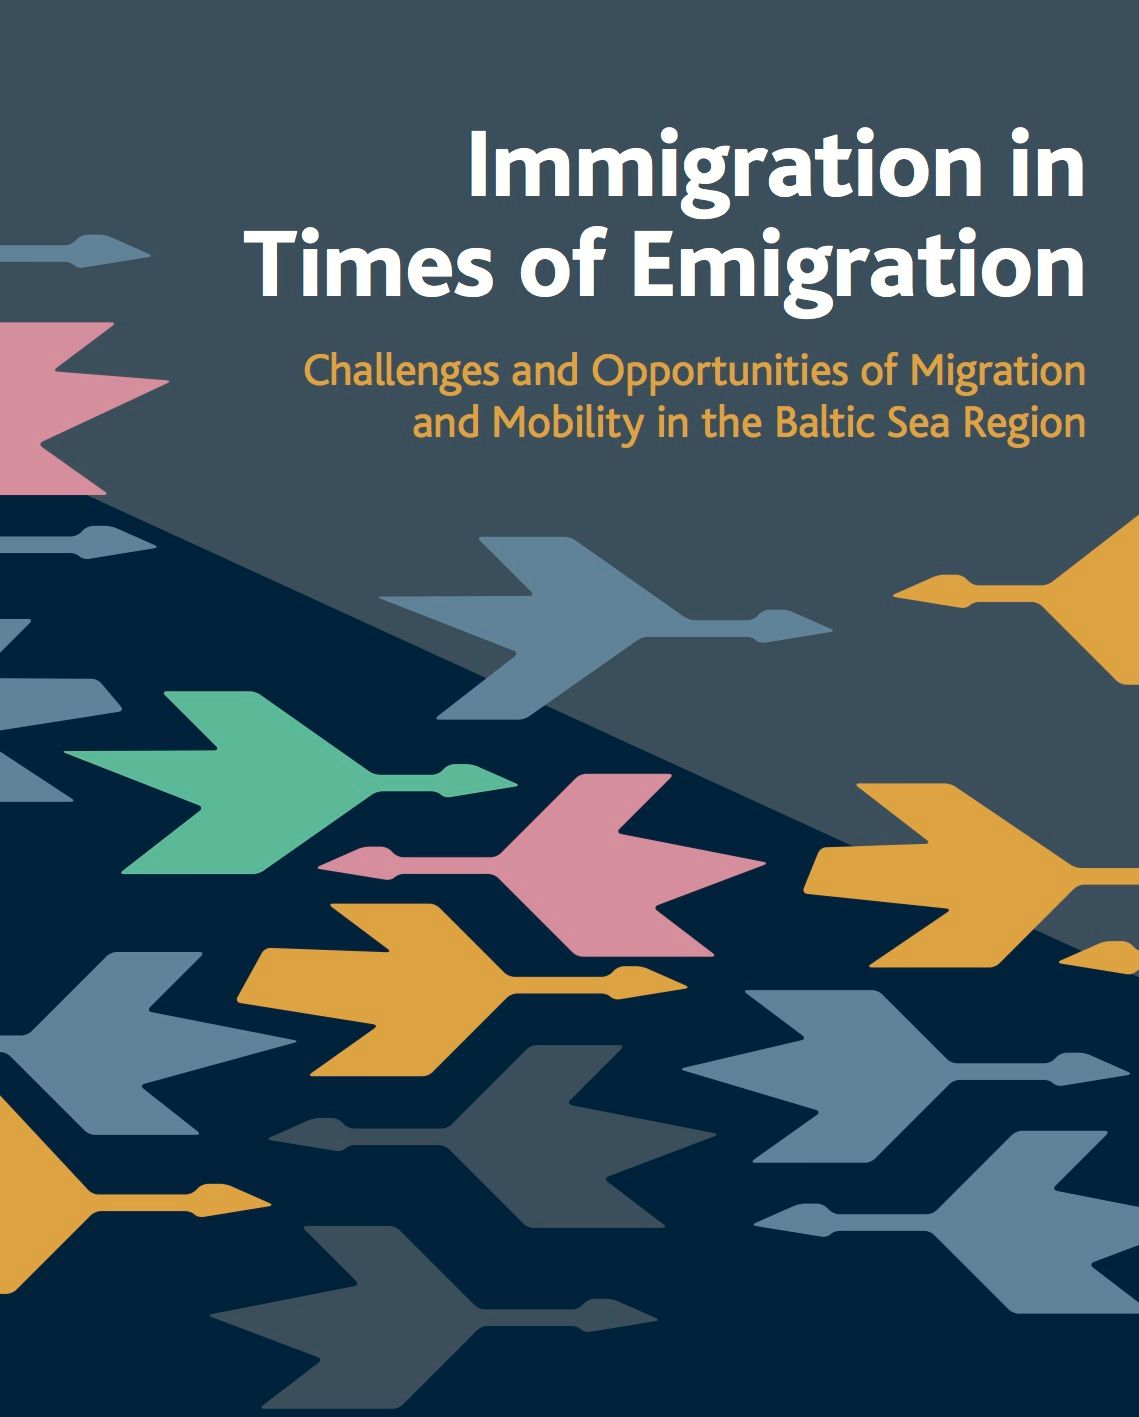 Immigration in Times of Emigration, eBook by Anna Horgby, Veronica Nordlund